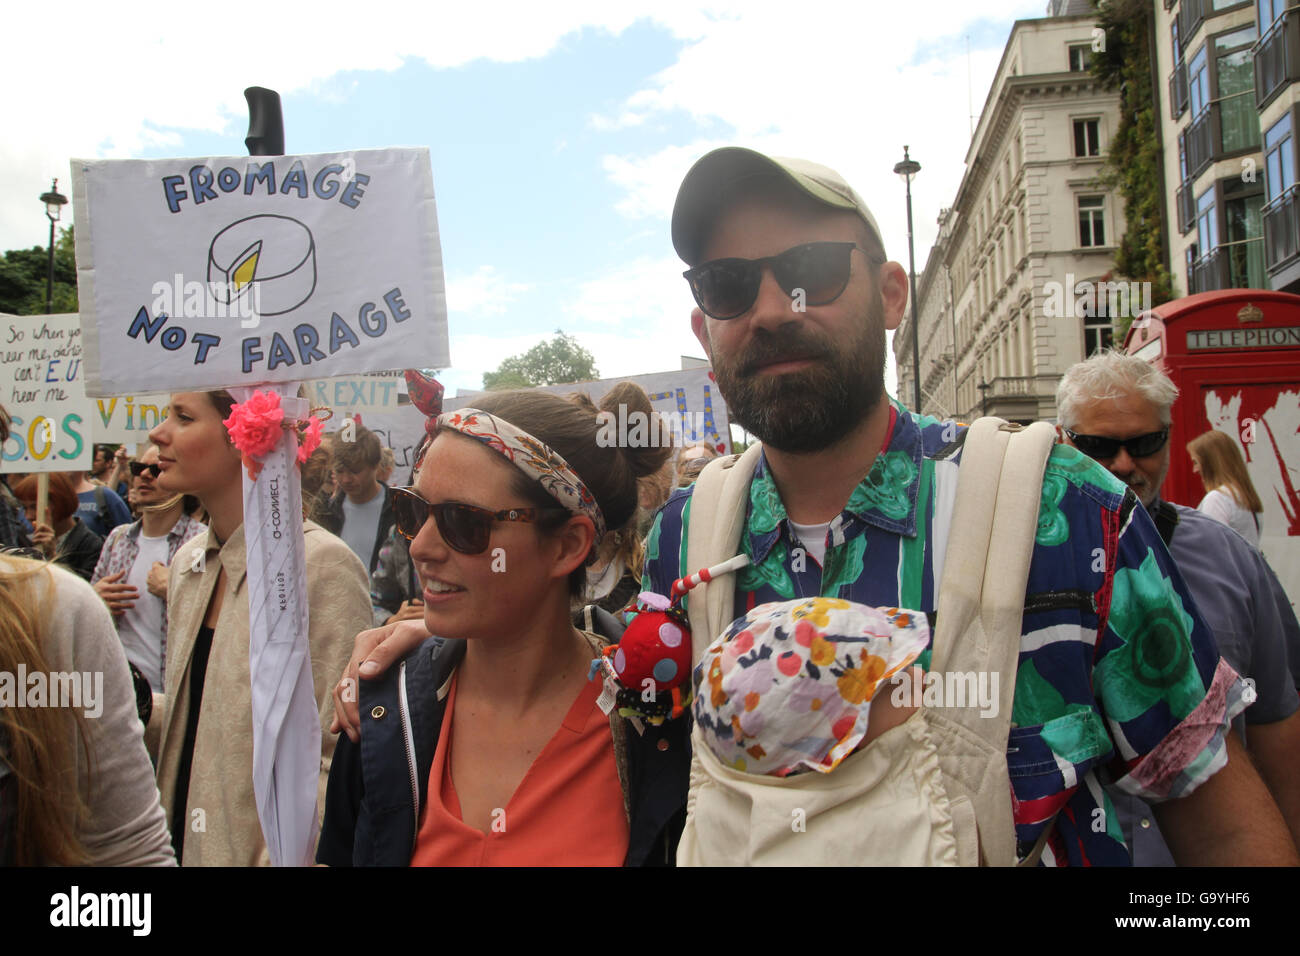 London, UK. 02nd July, 2016. LONDON, UK - JULY 2: A couple with their infant take part in the March For Europe demonstration a week after the Brexit Referendum vote. The pr Eu supporters march from Hyde Park to parliament Square.Photo: David Mbiyu/ Alamy New Live Stock Photo